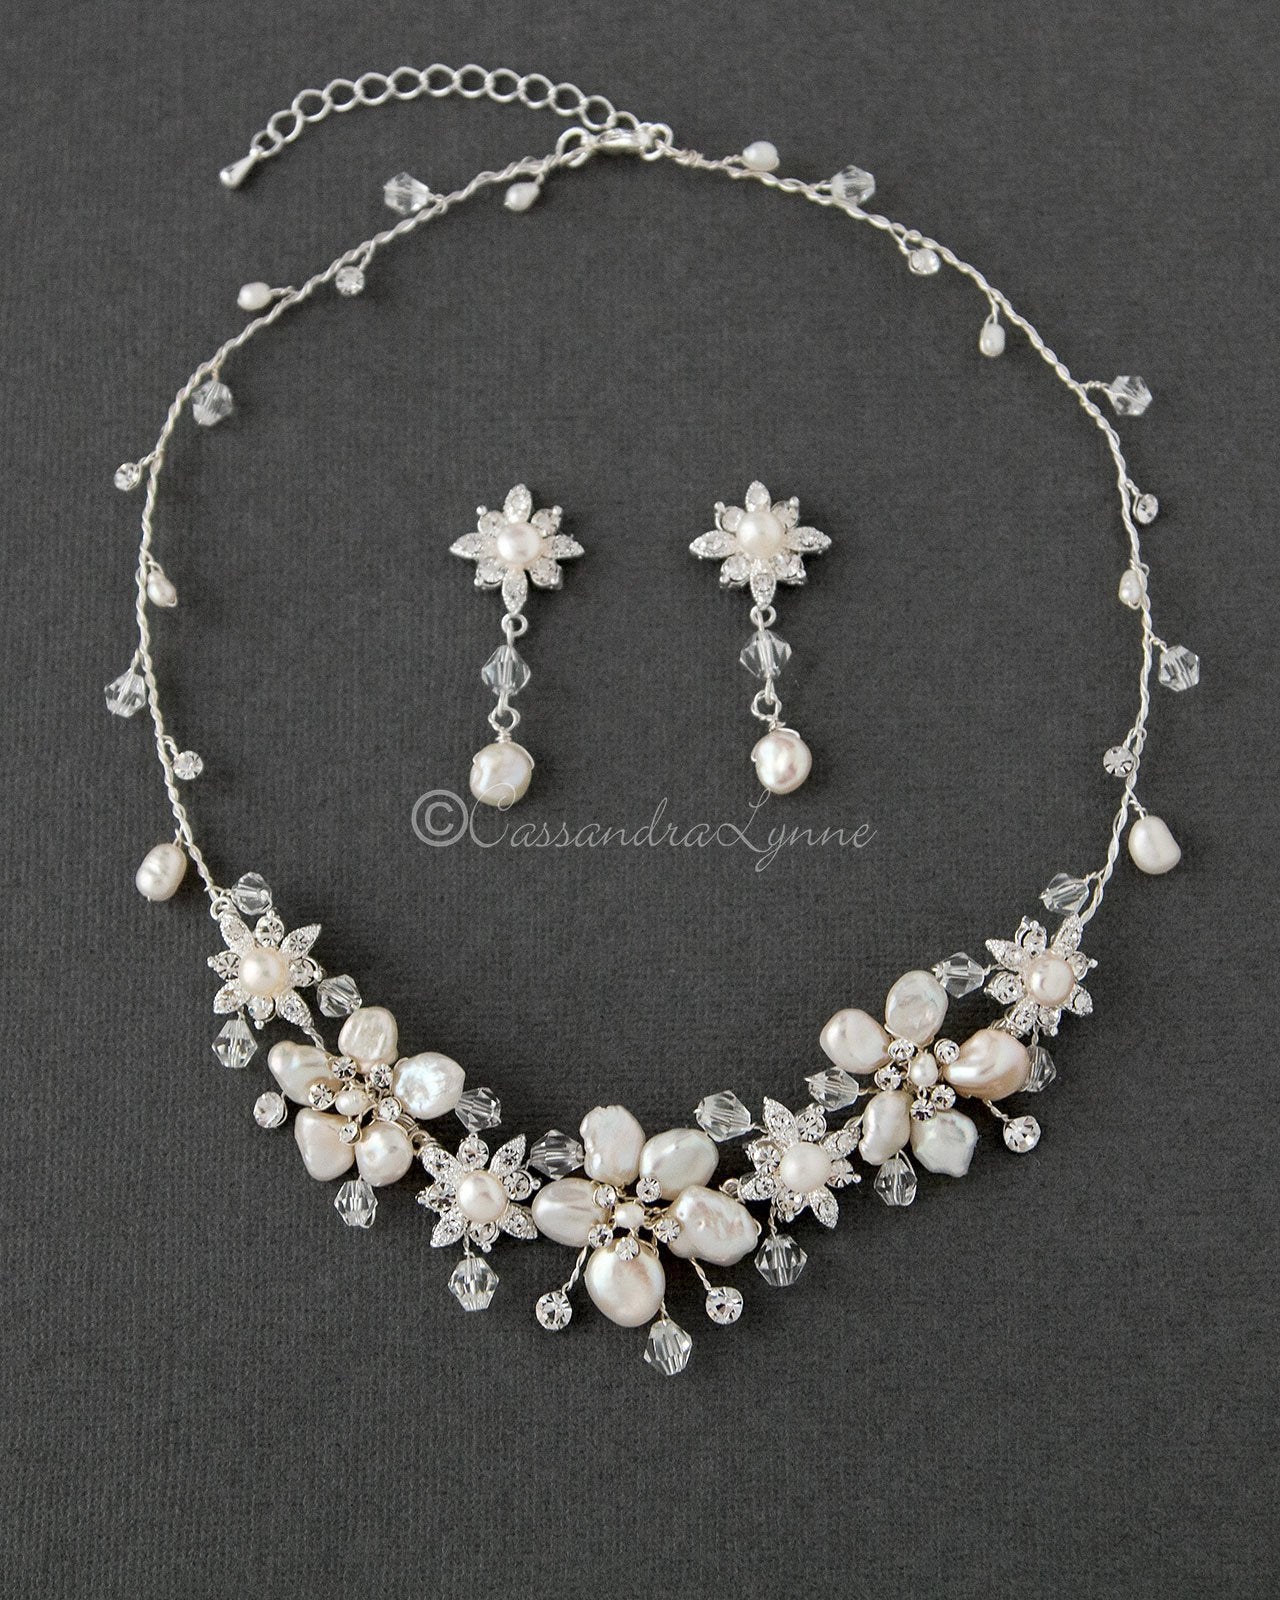 Bridal Necklace of Keshi Pearls and Crystals - Cassandra Lynne